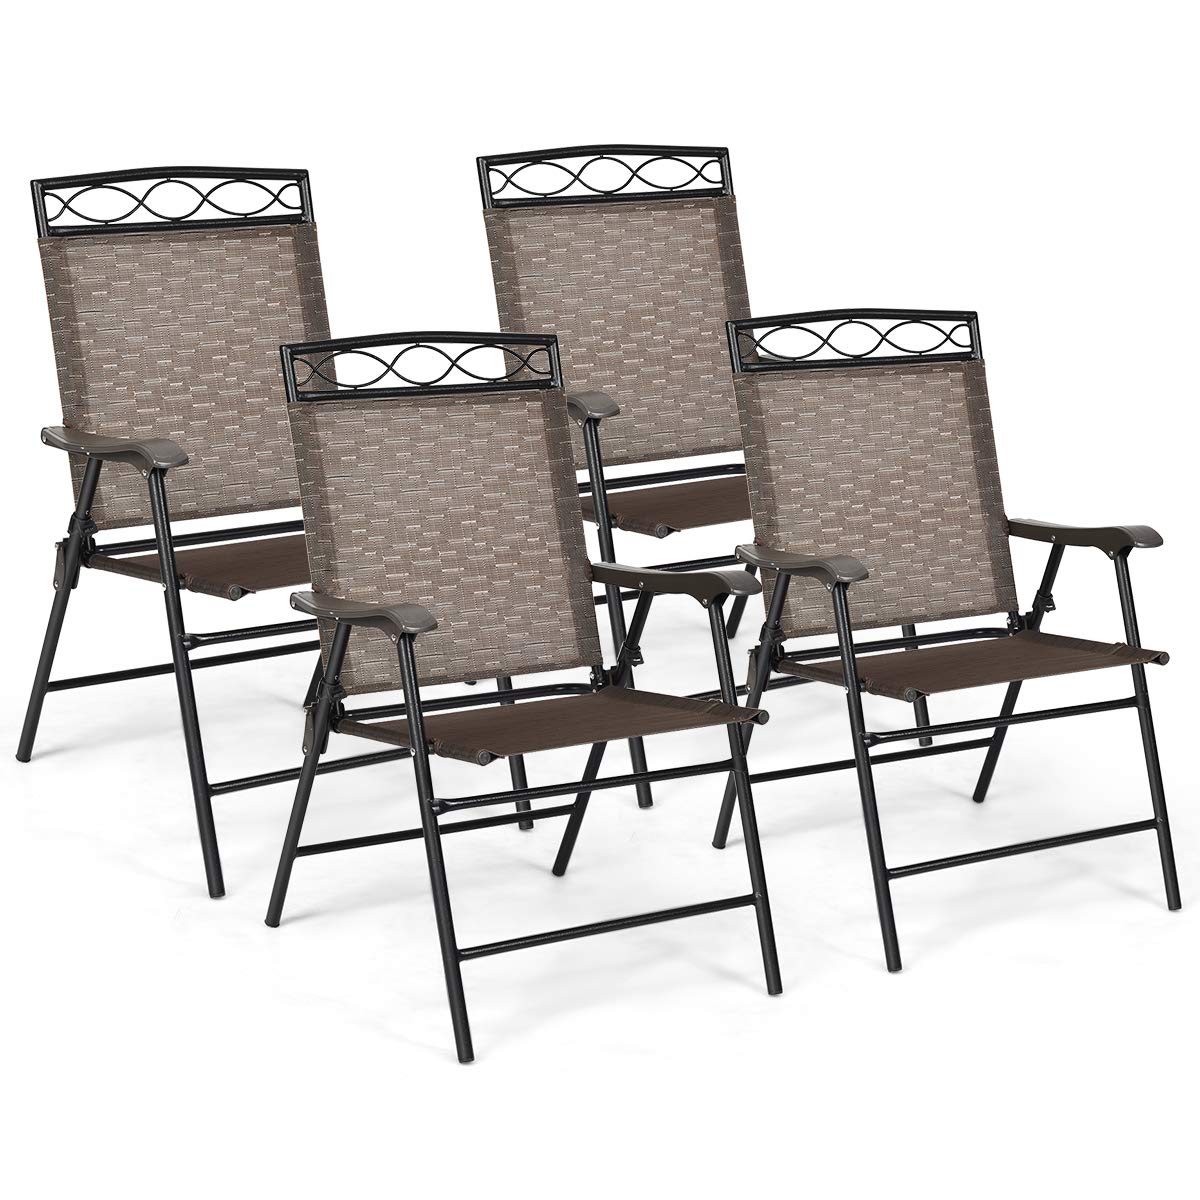 Giantex Set of 4 Patio Folding dining chairs for Camping, Beach, Backyard, Deck Portable w/Armrest and Metal Frame, 4-Pack (Brown)